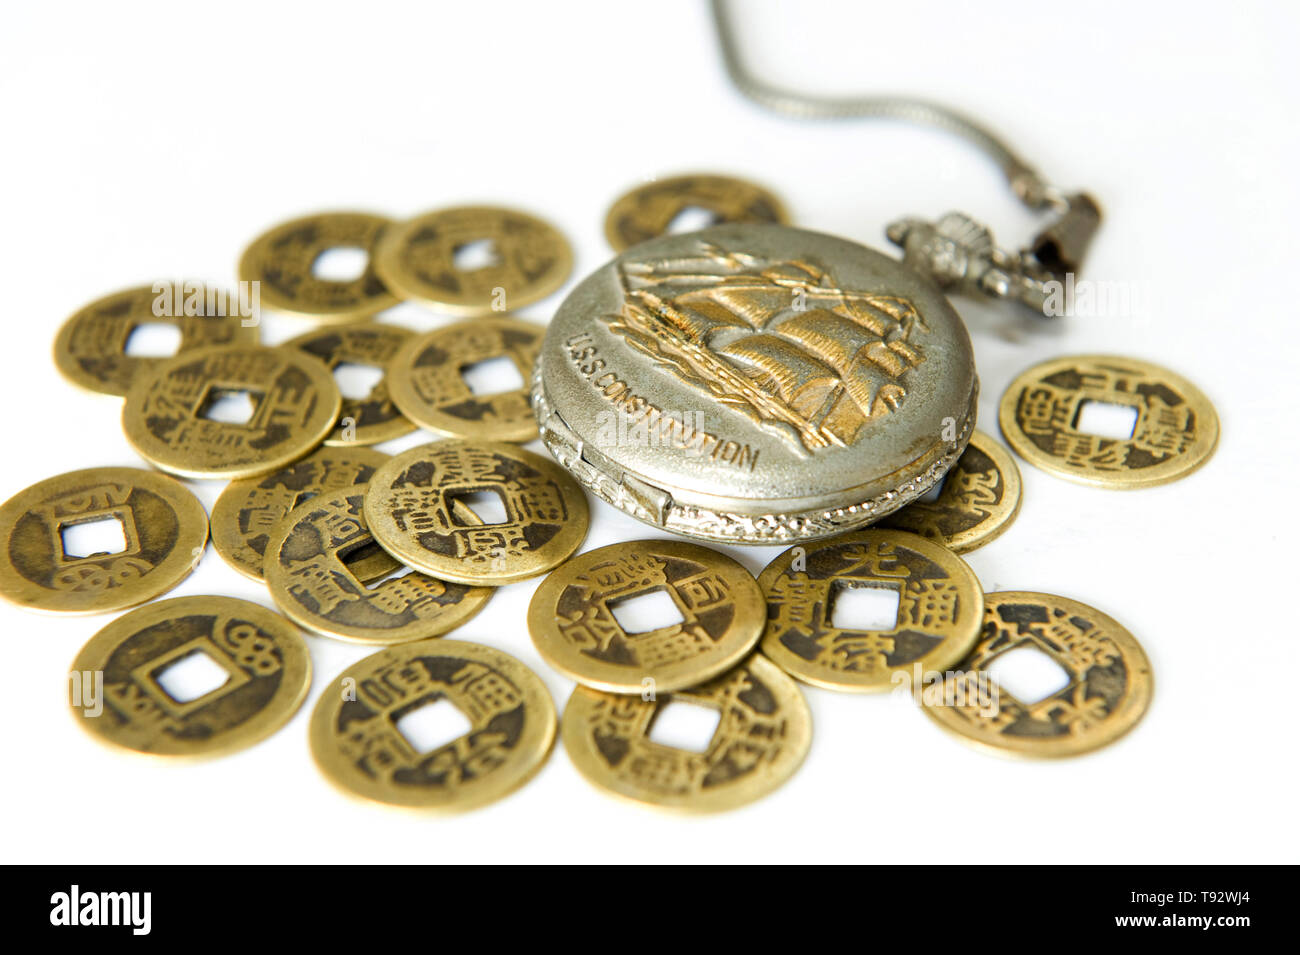 Pocket watch and ancient Chinese coins Stock Photo